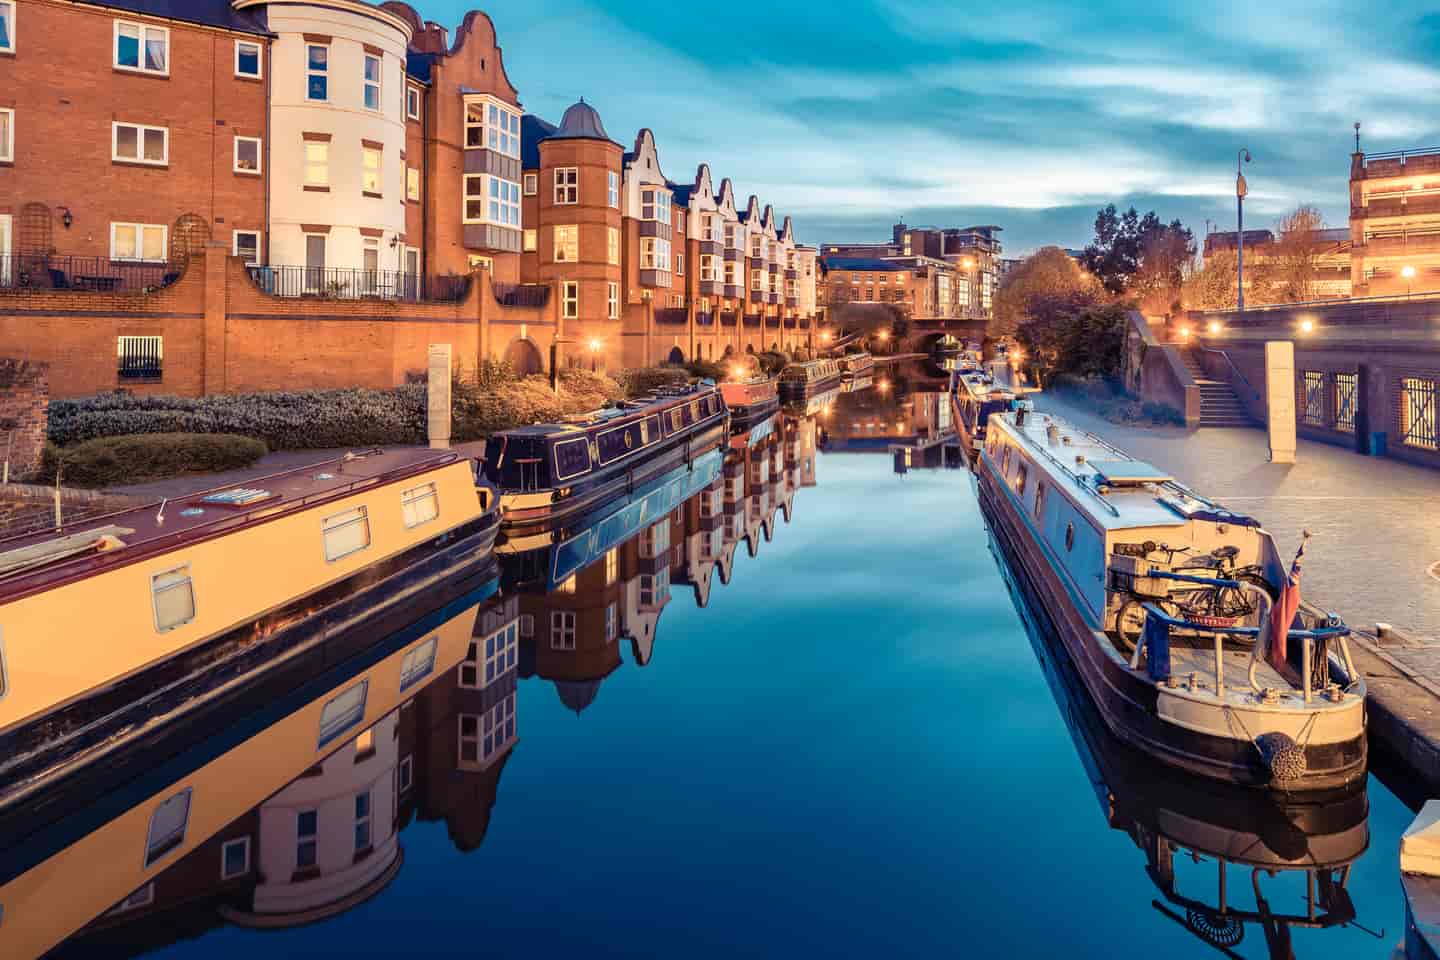 Student Accommodation in Birmingham - Narrowboats on the canal